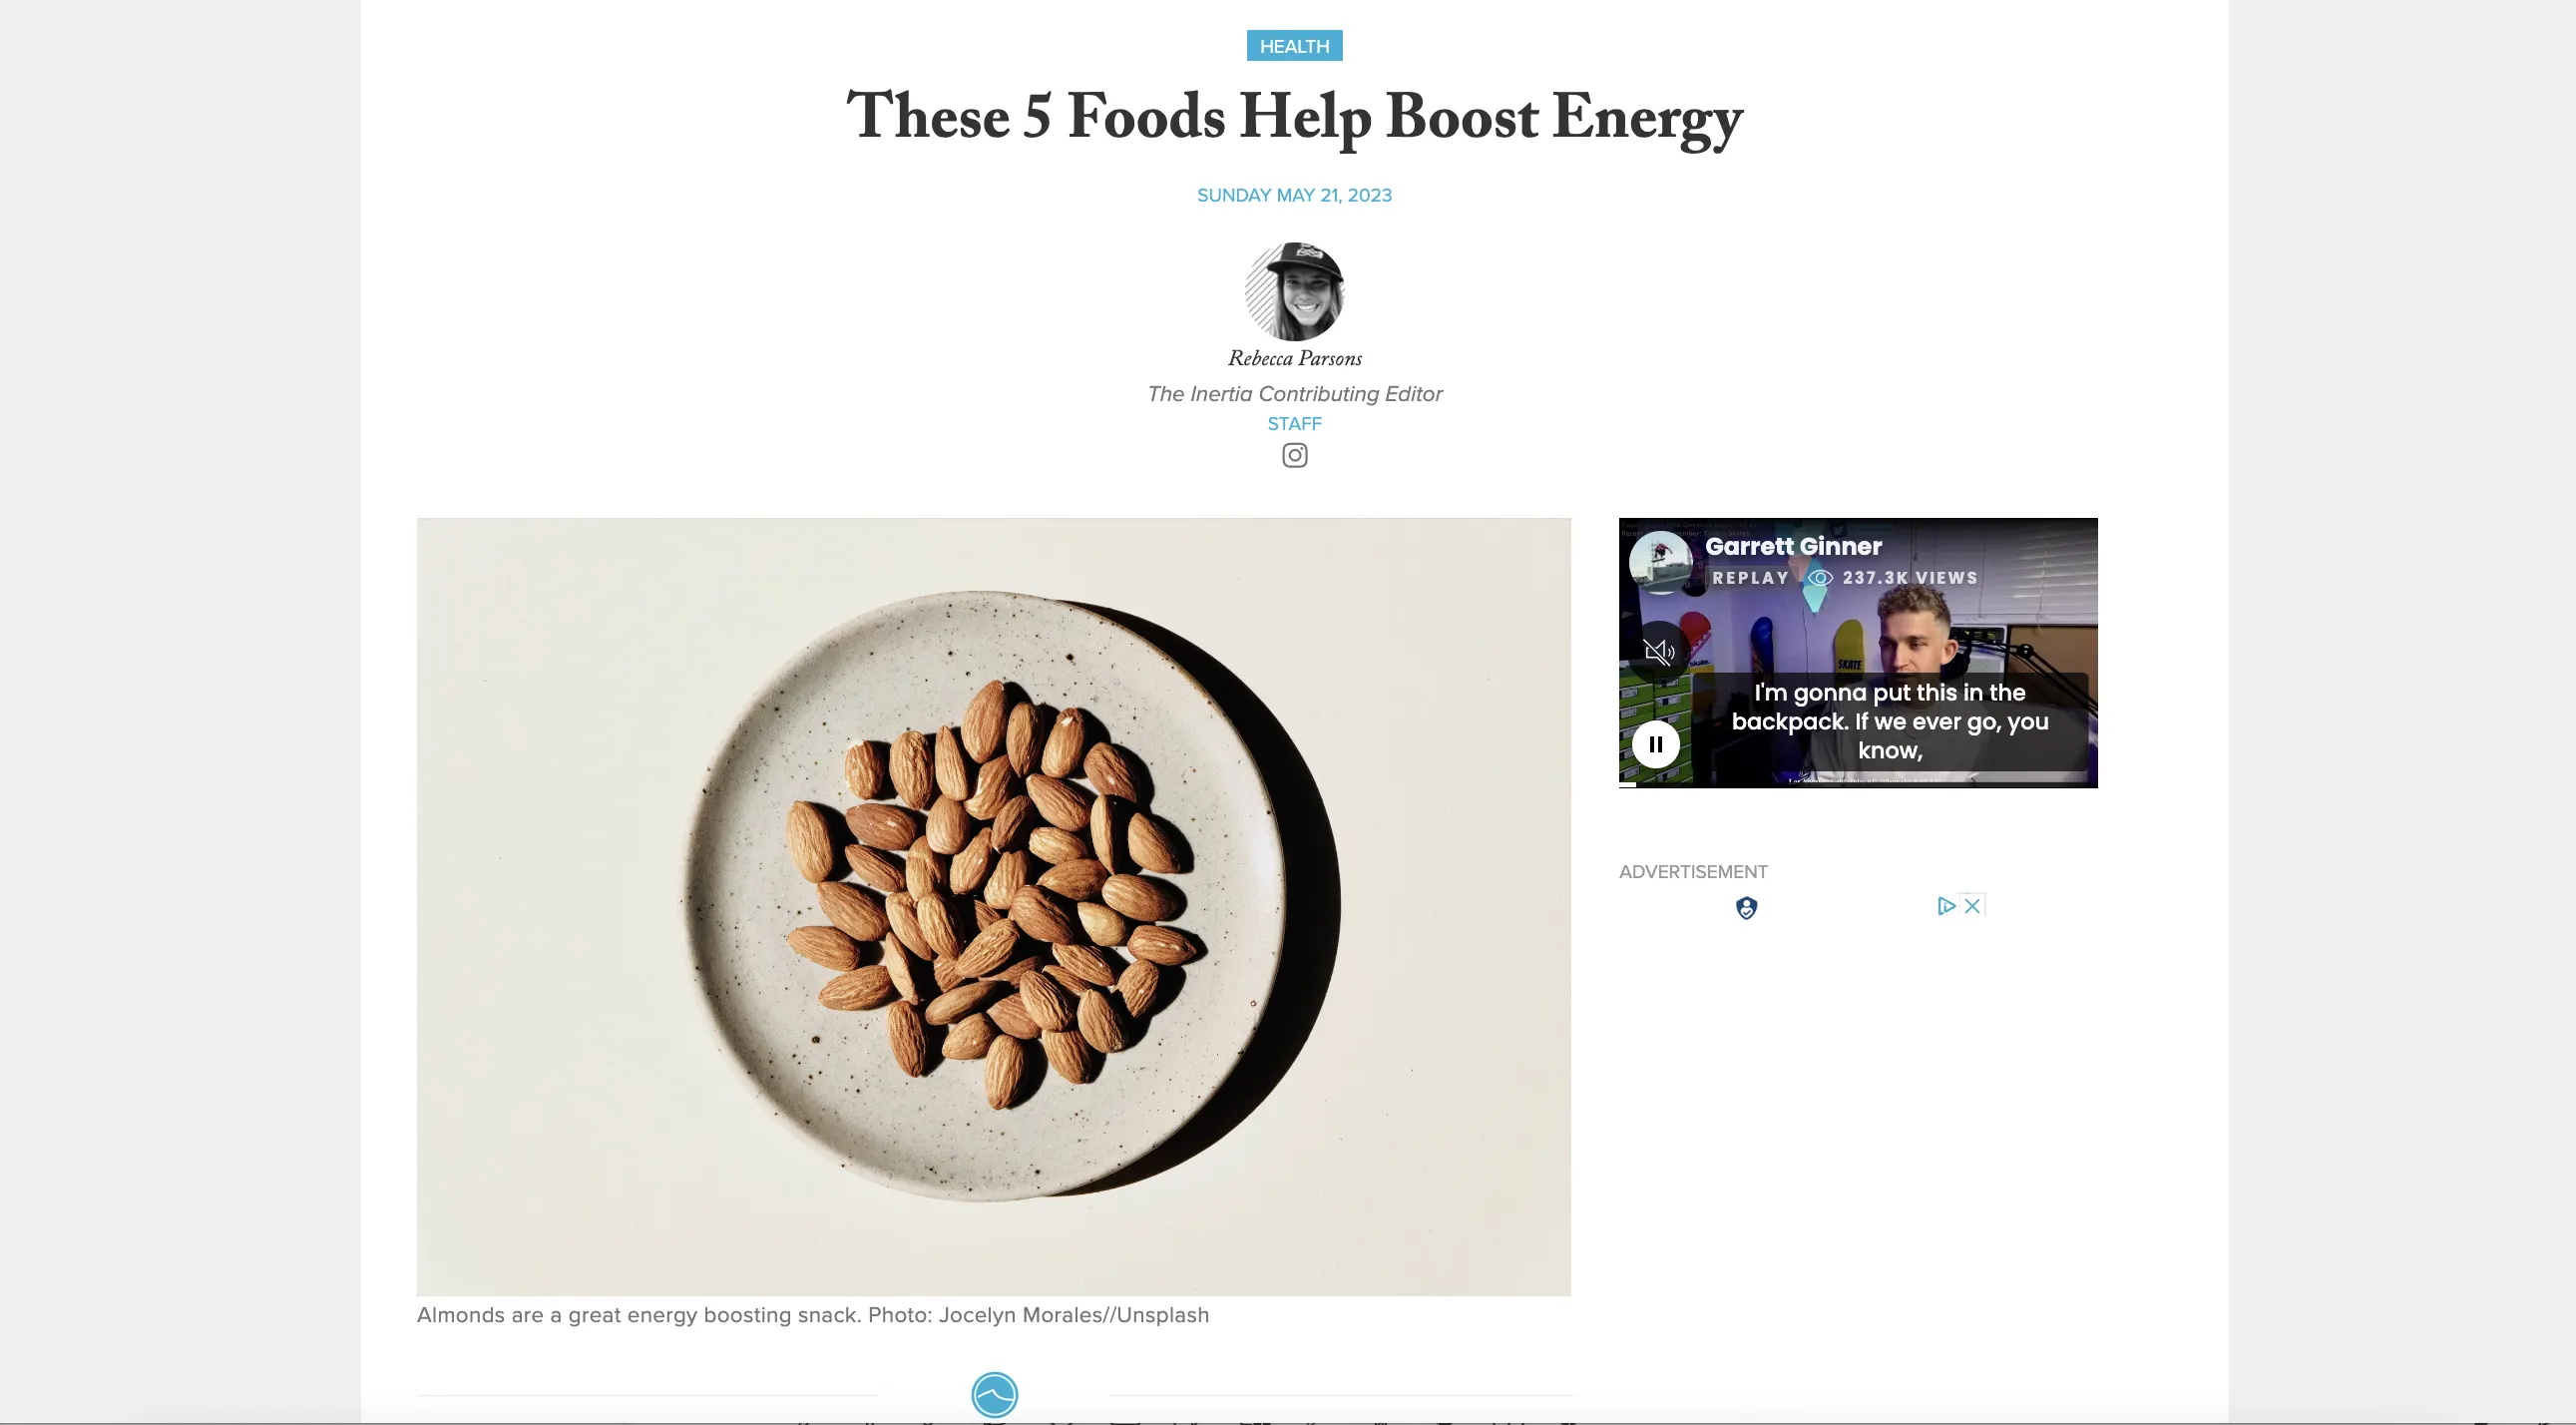 Dr. Reuben Chen’s Top Picks for Energizing Snacks Featured in The Inertia 